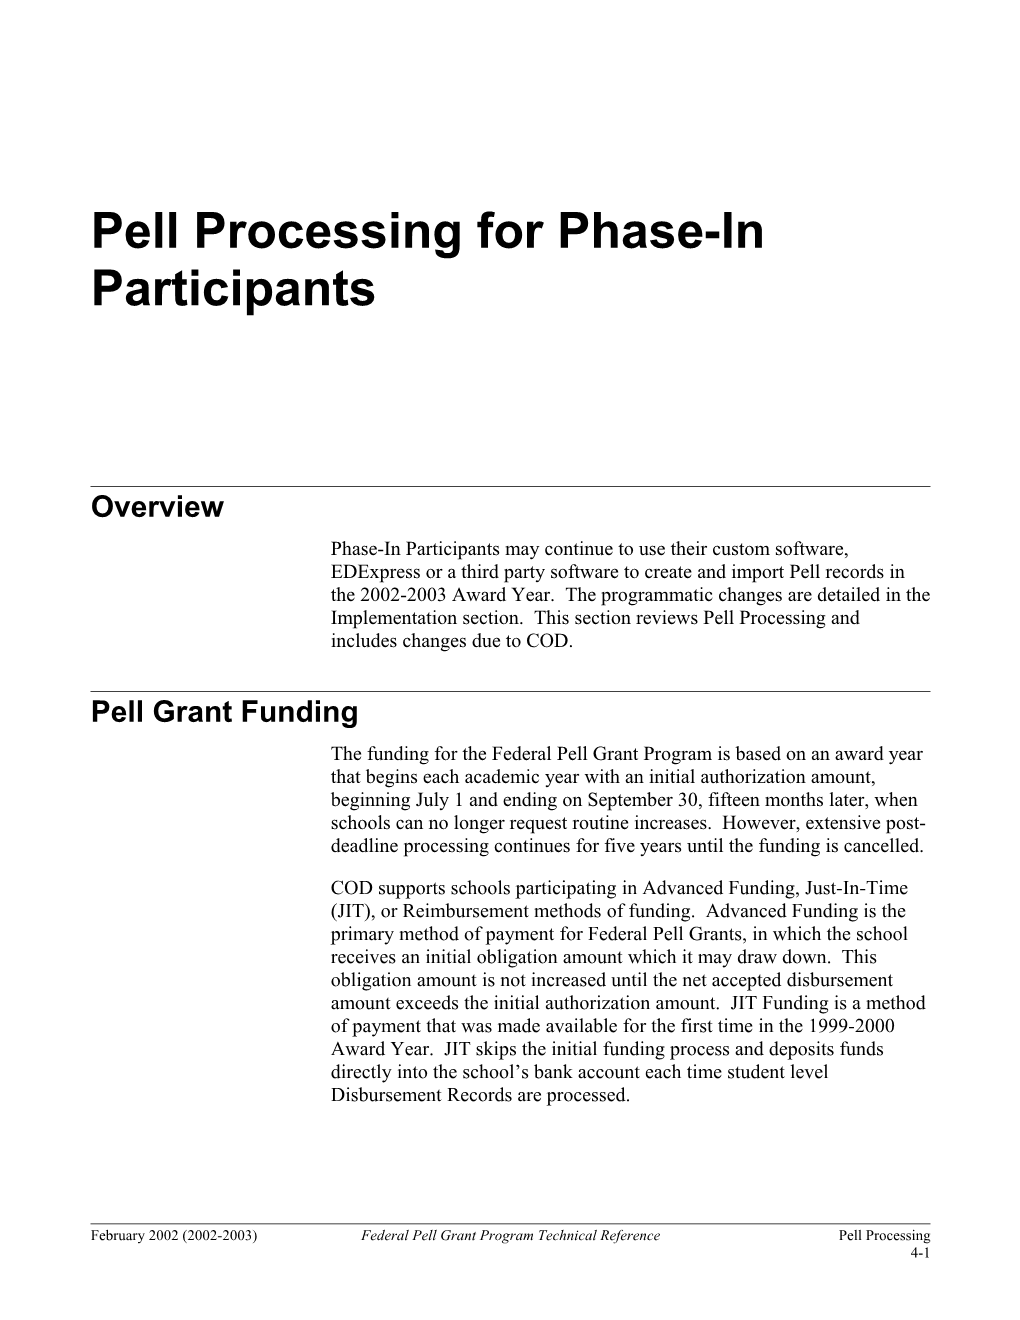 Pell Processing for Phase-In Participants